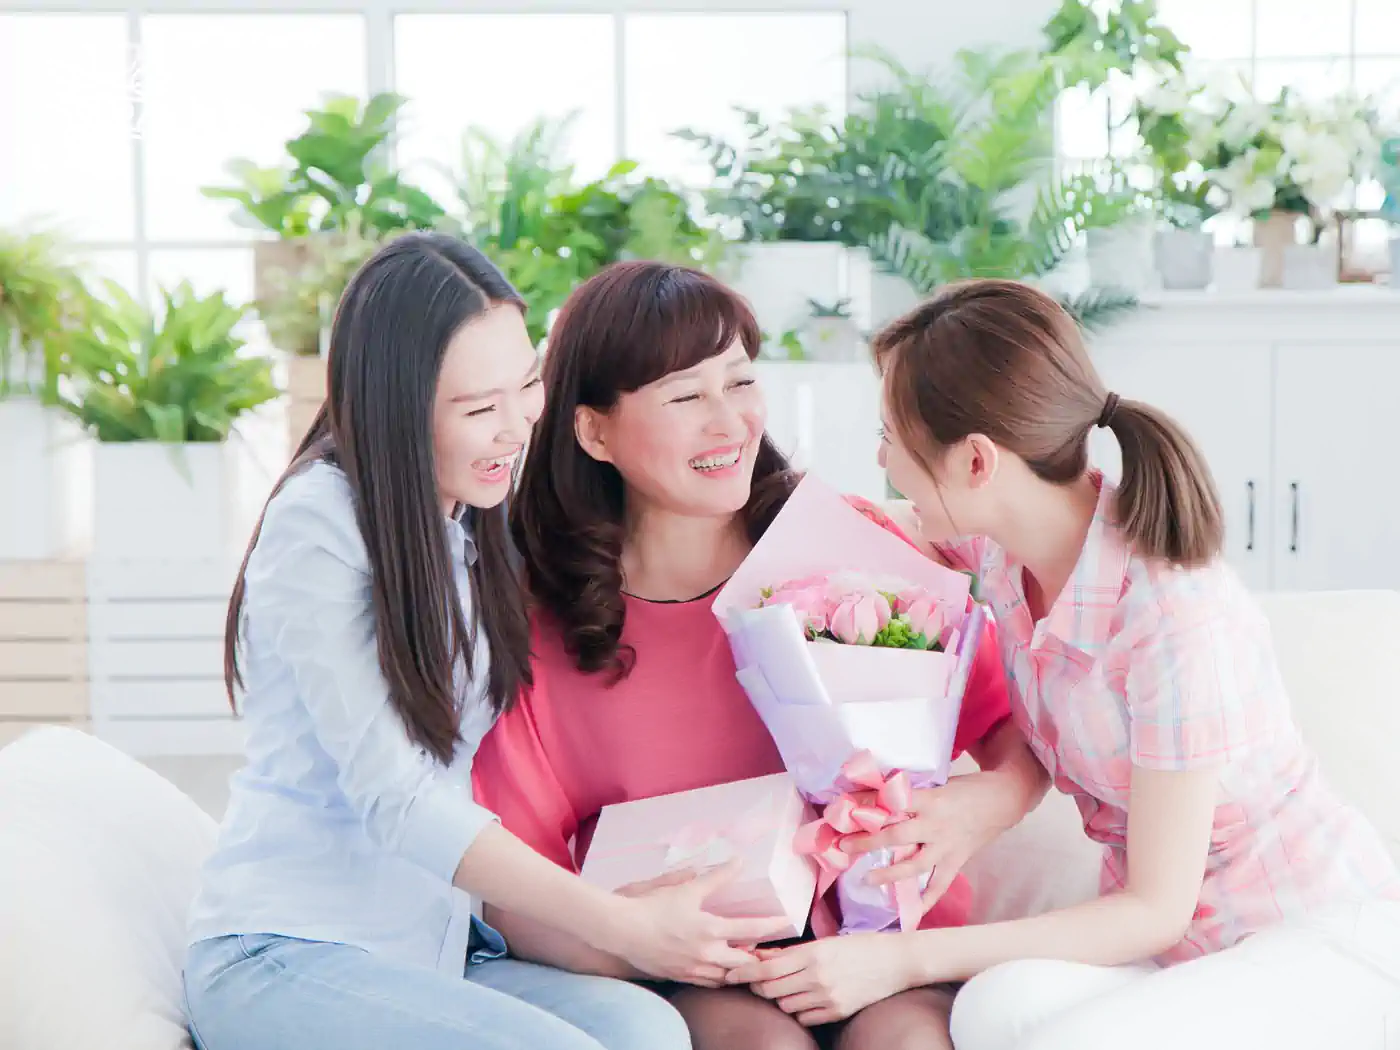 A cheerful image of a family gathered together, presenting a bouquet of flowers as a token of affection and celebration. Fabulous Flowers and Gifts.